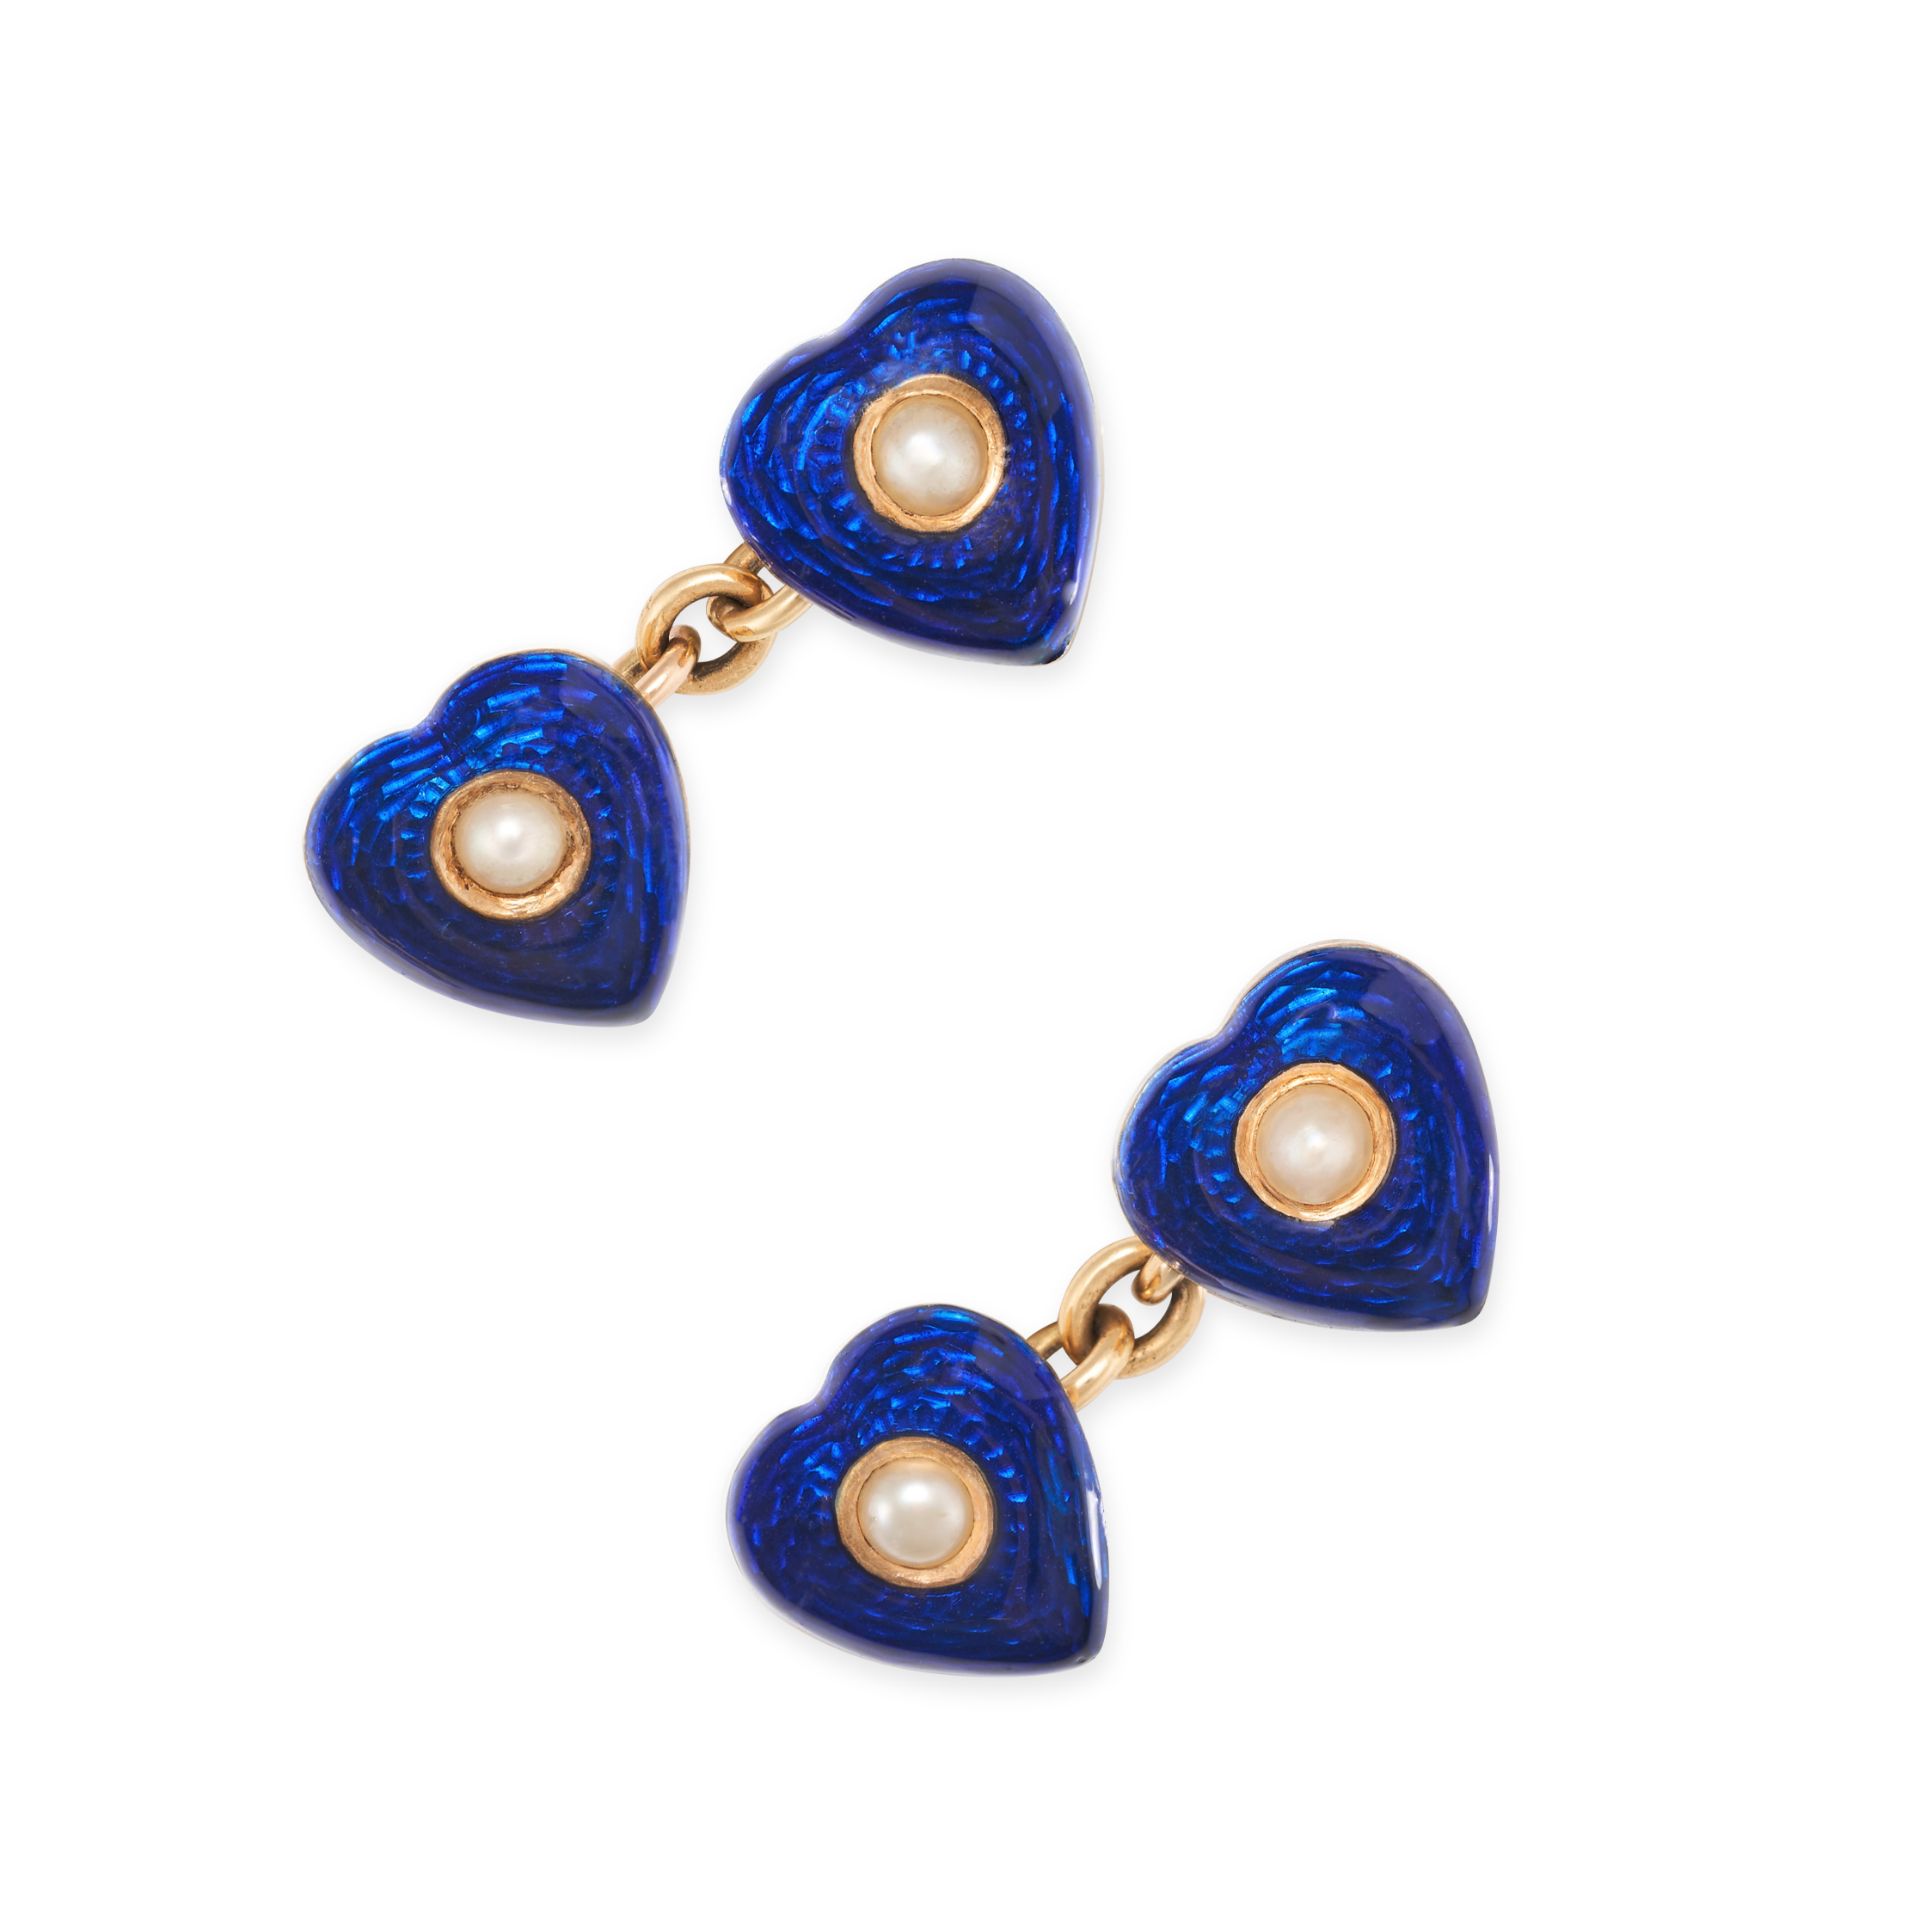 A PAIR OF ANTIQUE PEARL AND ENAMEL HEART CUFFLINKS in 18ct yellow gold, the heart shaped faces se...